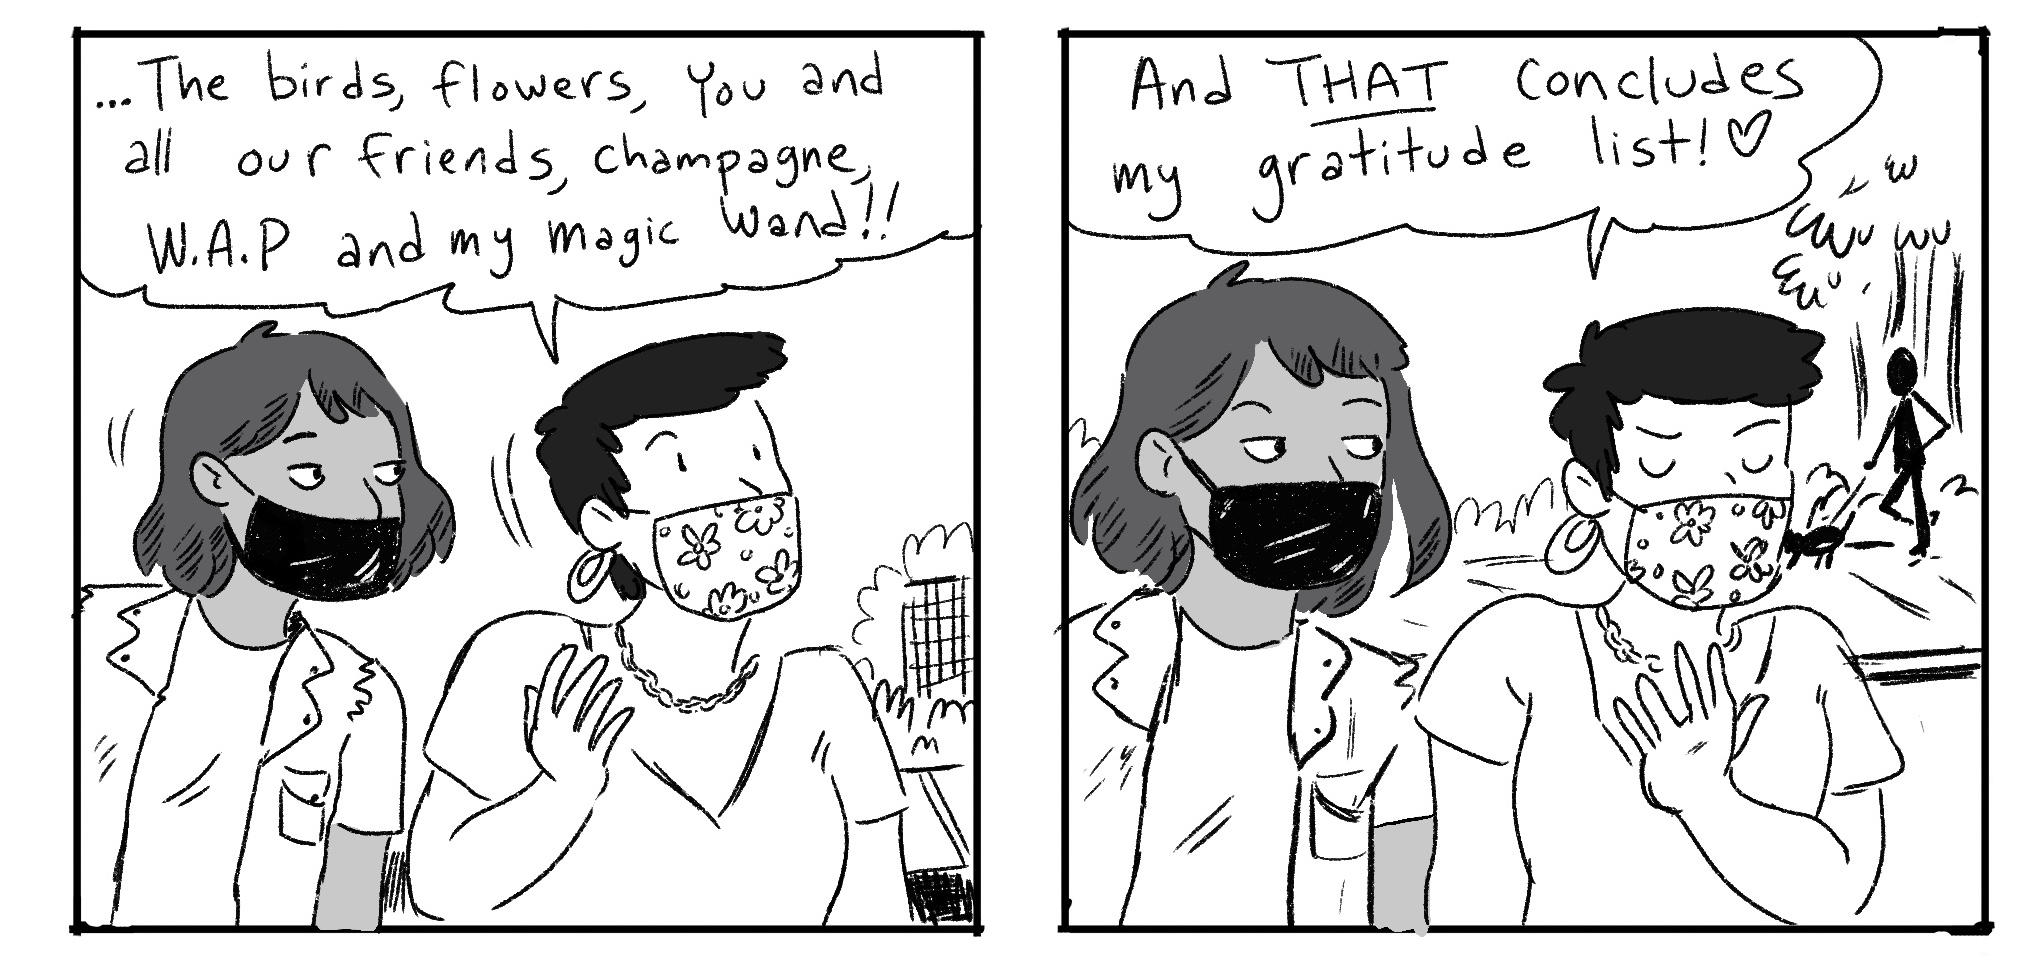 Two panels of the Grease Bat comic. Panel 1: Ari and Gwen are both wearing masks. Gwen is midsentence: "...the birds, flowers, you and all our friends, champagne, W.A.P. and my magic wand!" Panel 2: Gwen: "And THAT concludes my gratitude list!"